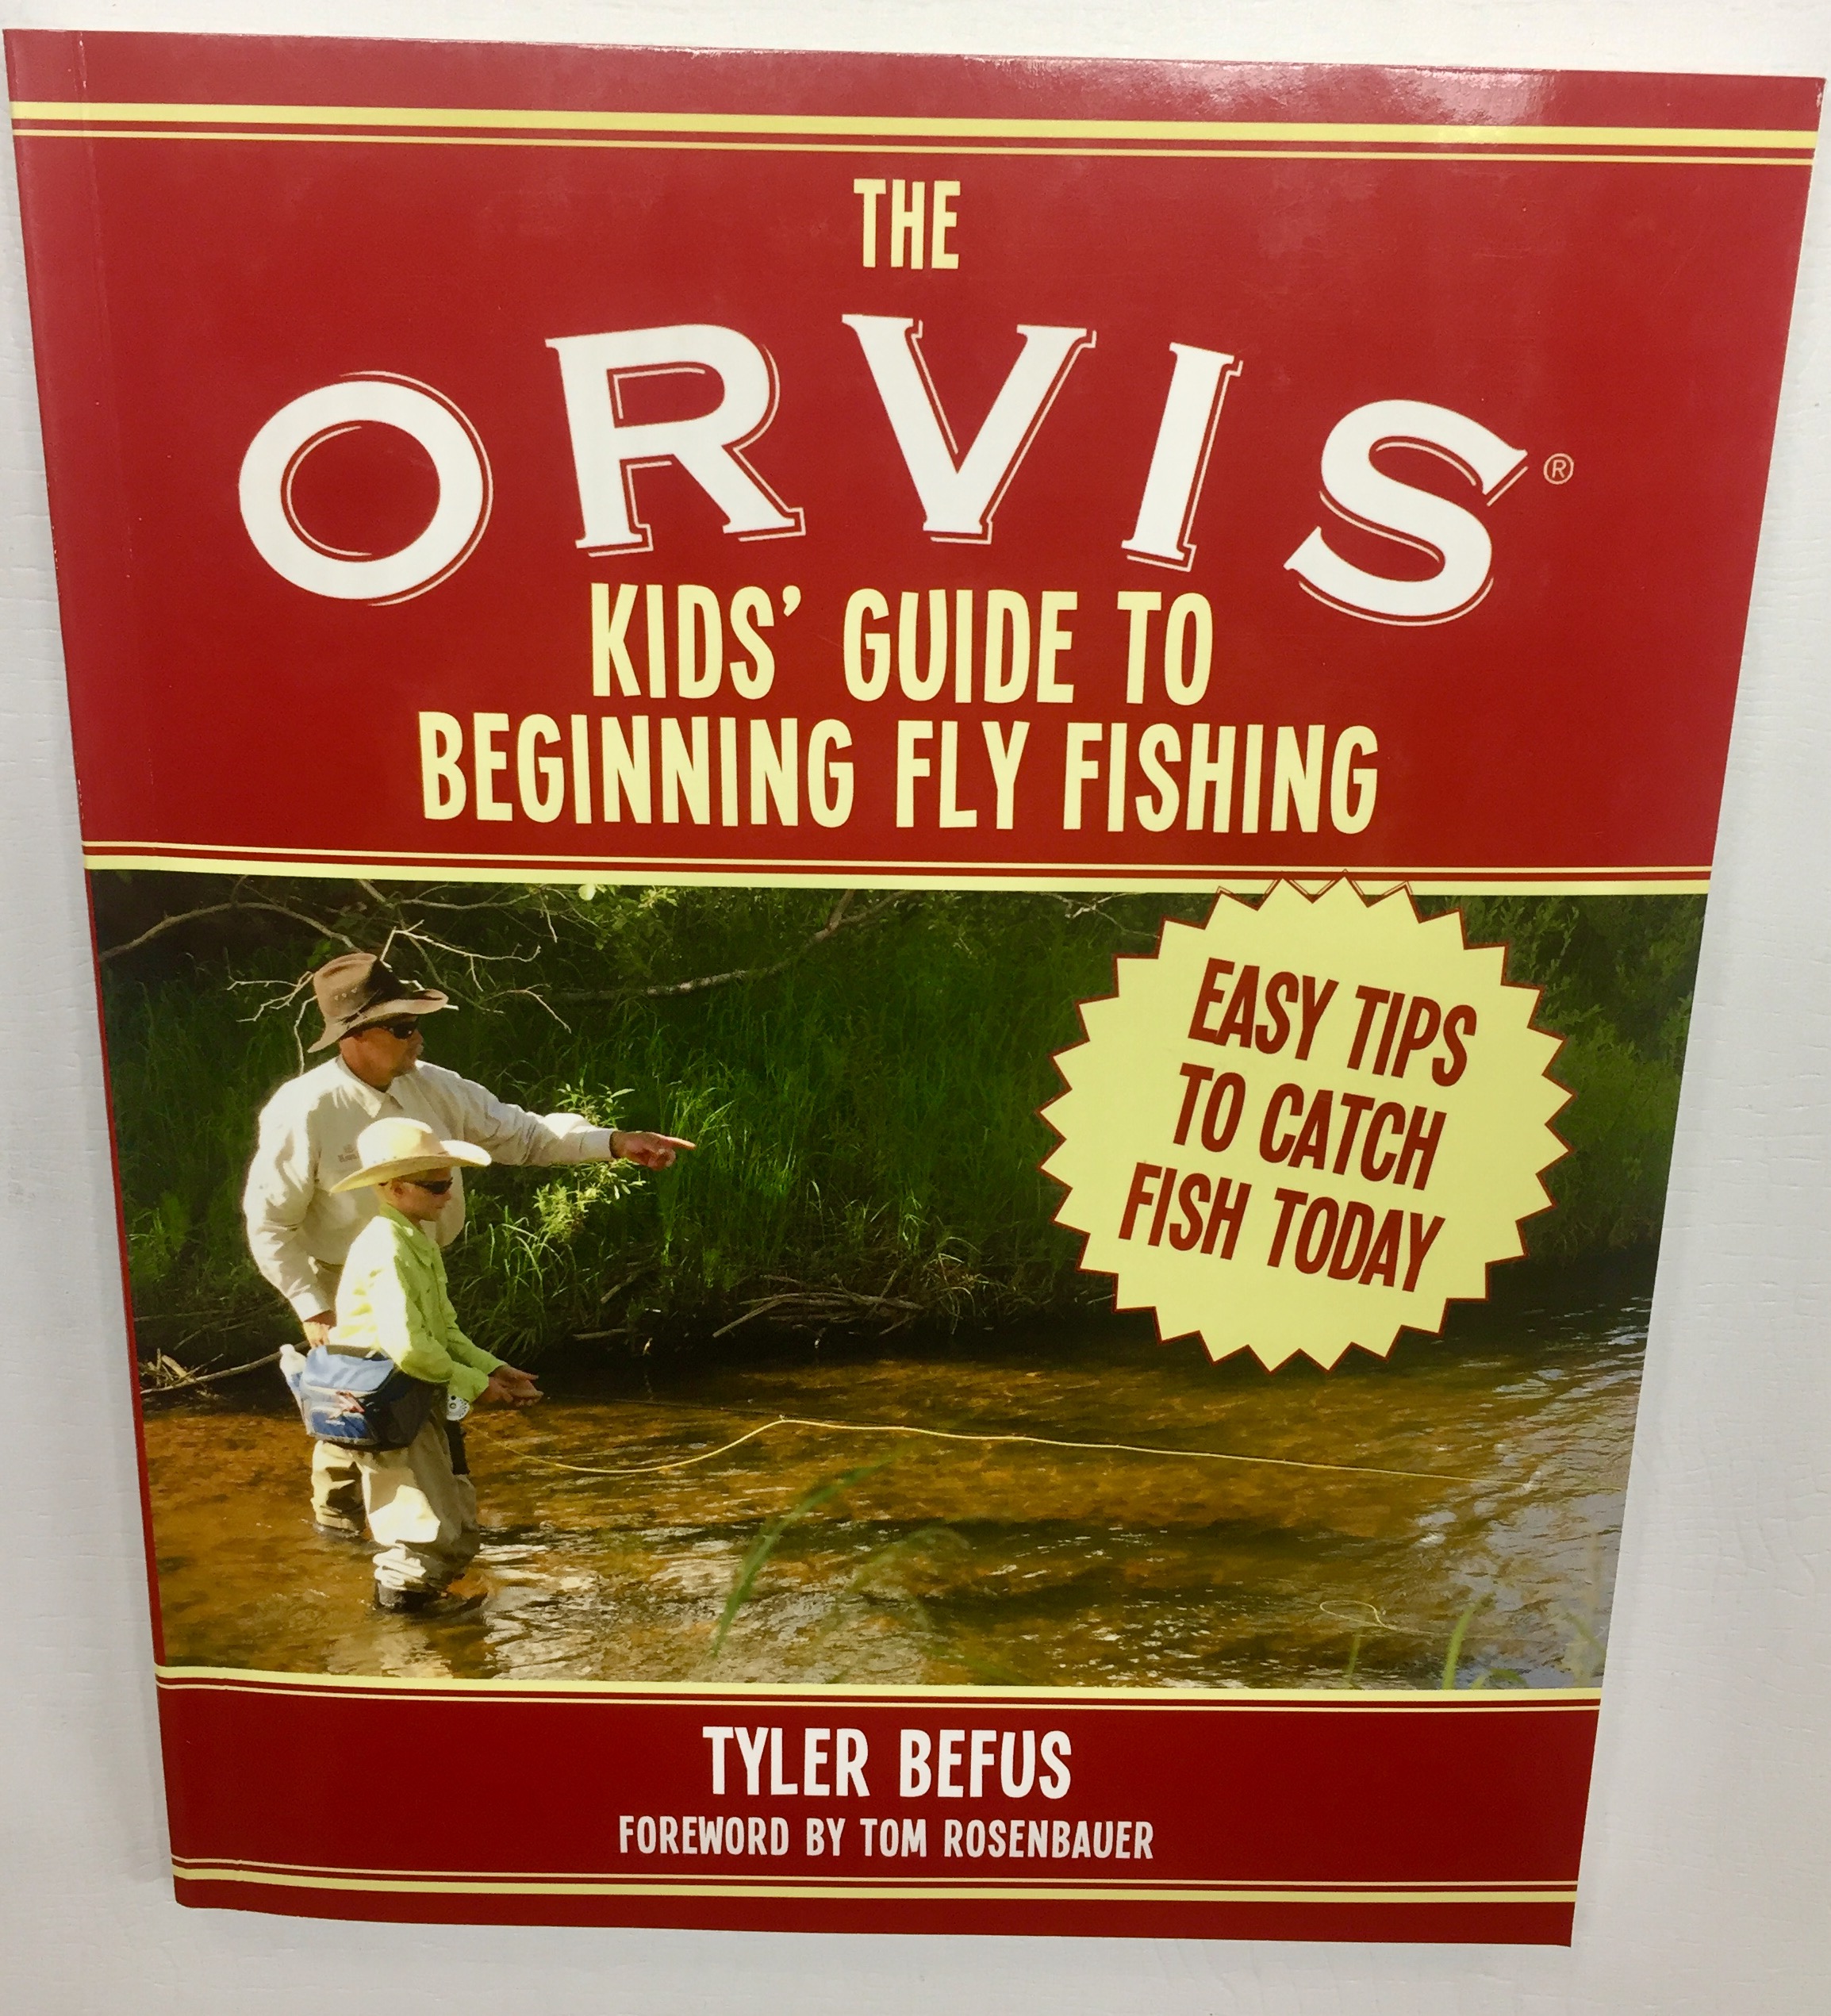 https://www.crosscurrents.com/wp-content/uploads/2018/01/Orvis-Kids-Guide-to-Fly-Fishing-book-front-cover.jpg